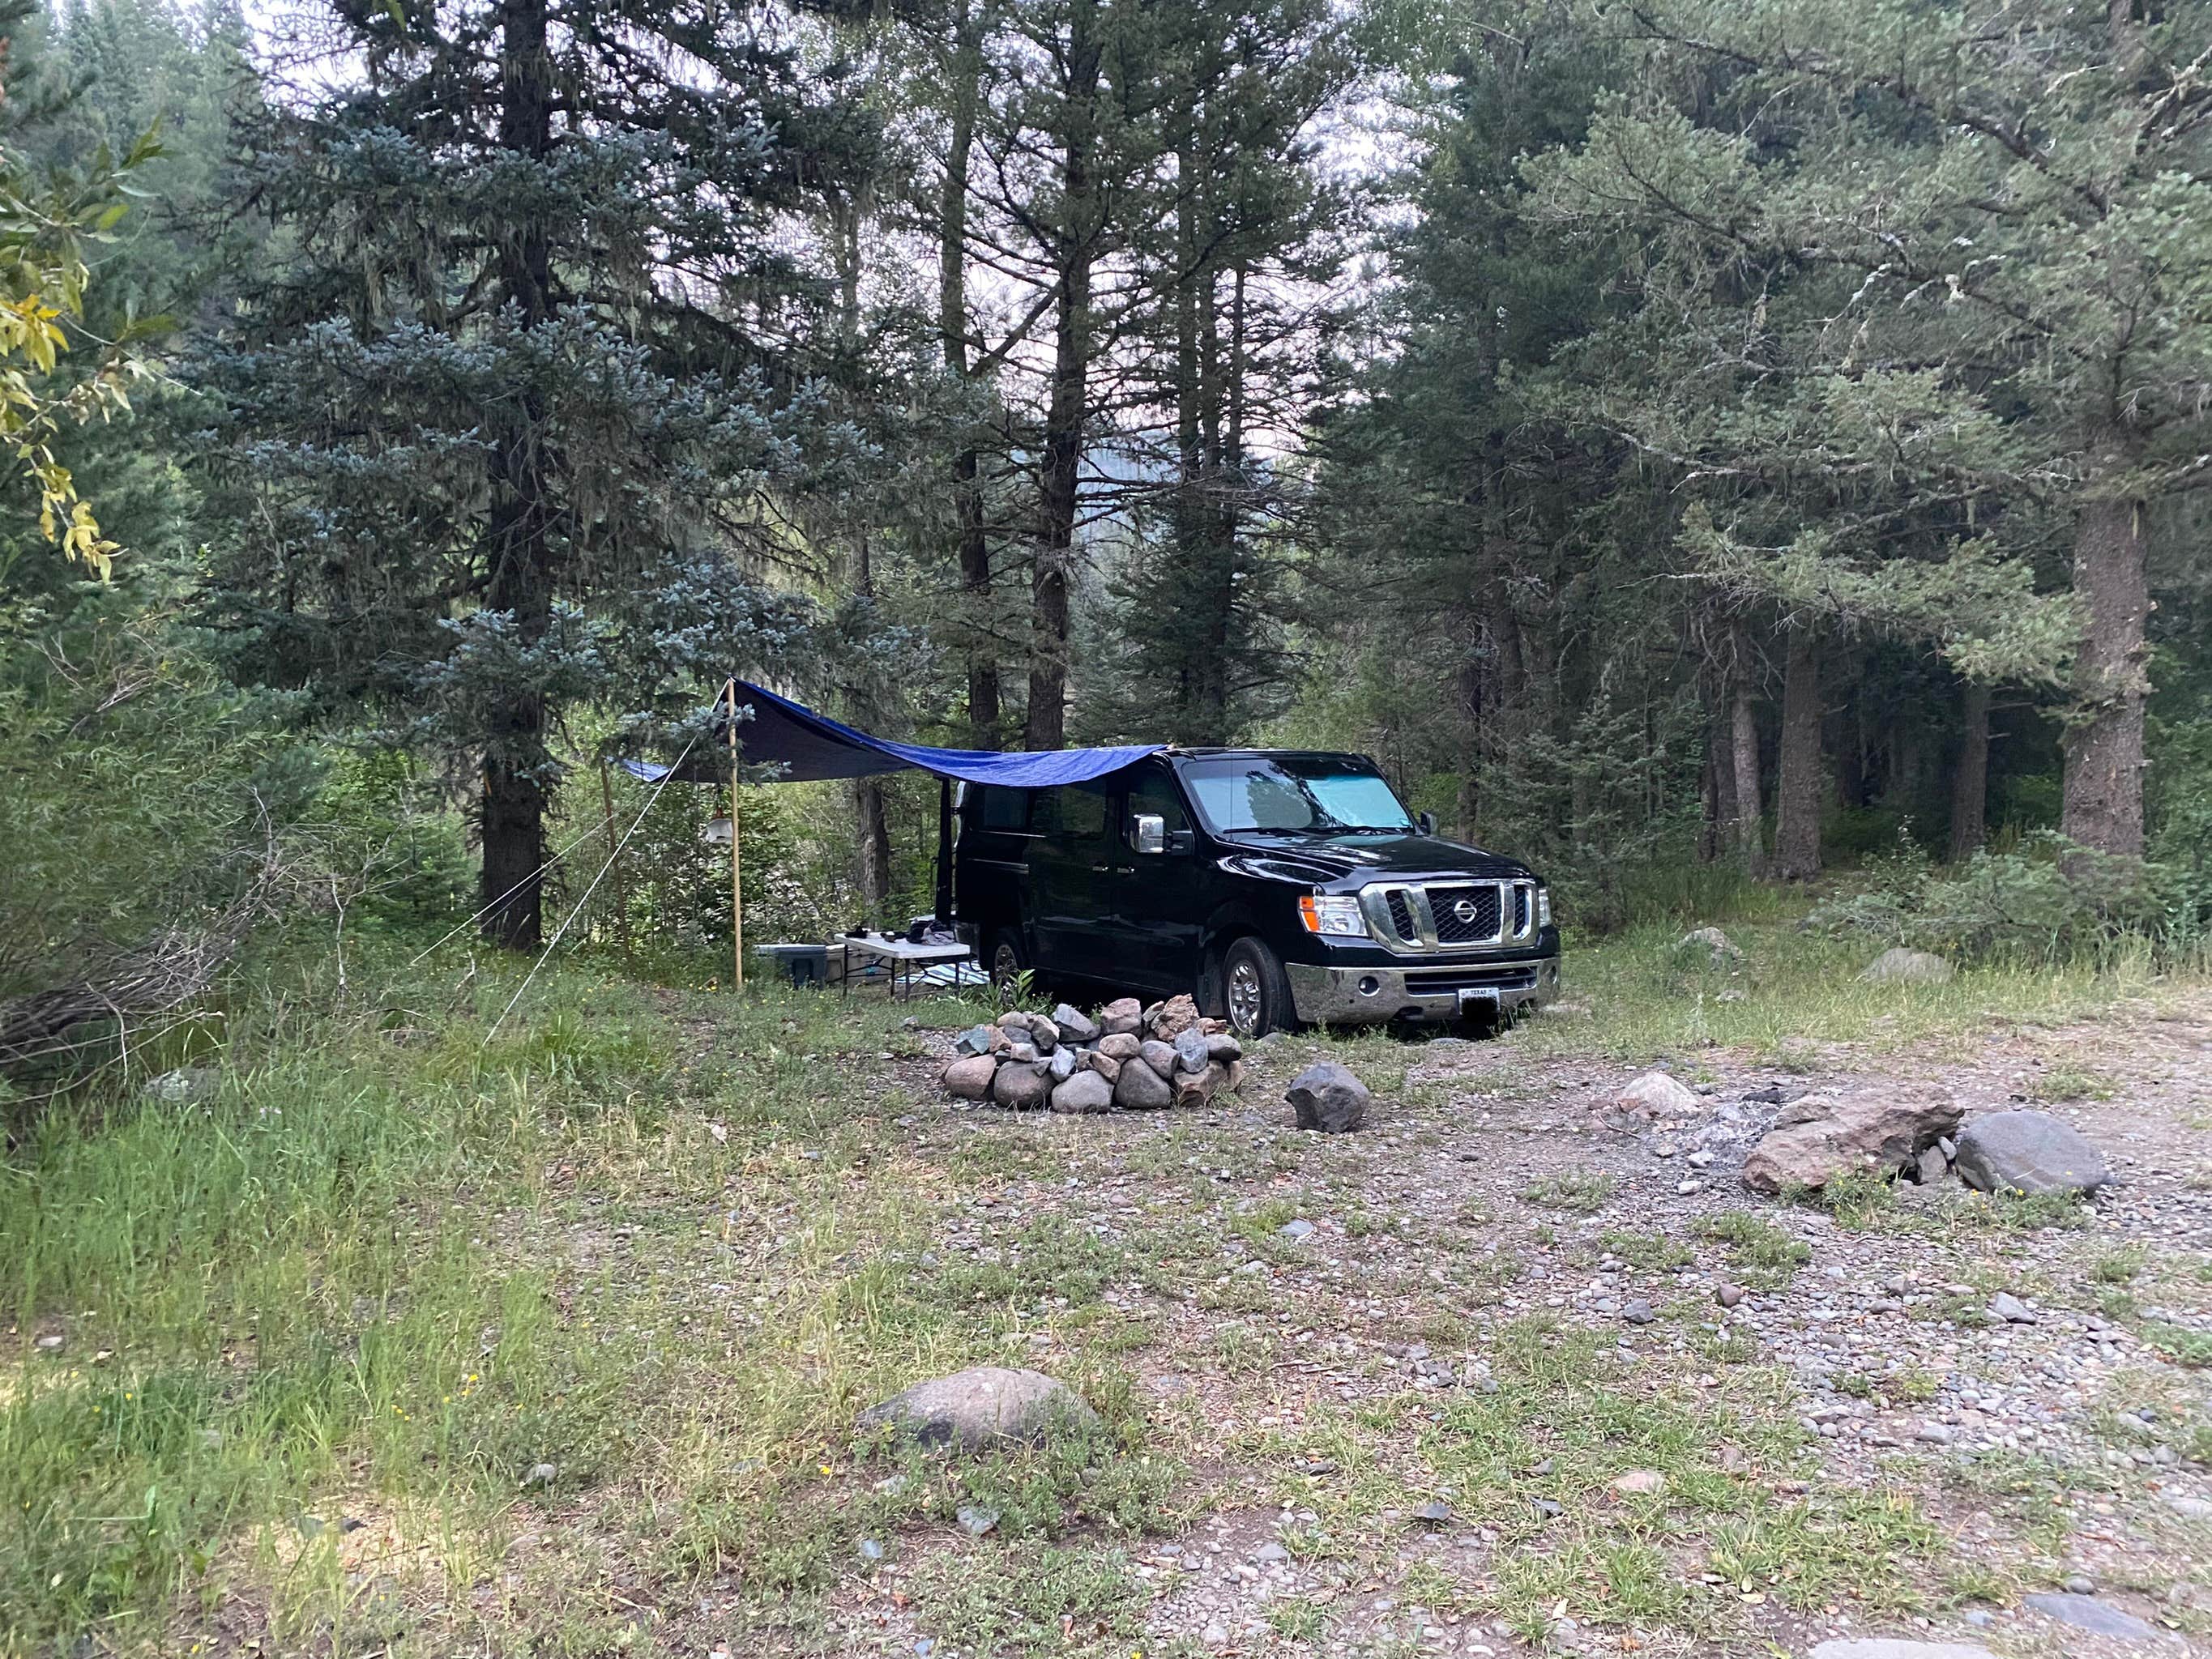 Camper submitted image from East Fork San Juan River, USFS Road 667 - Dispersed Camping - 2